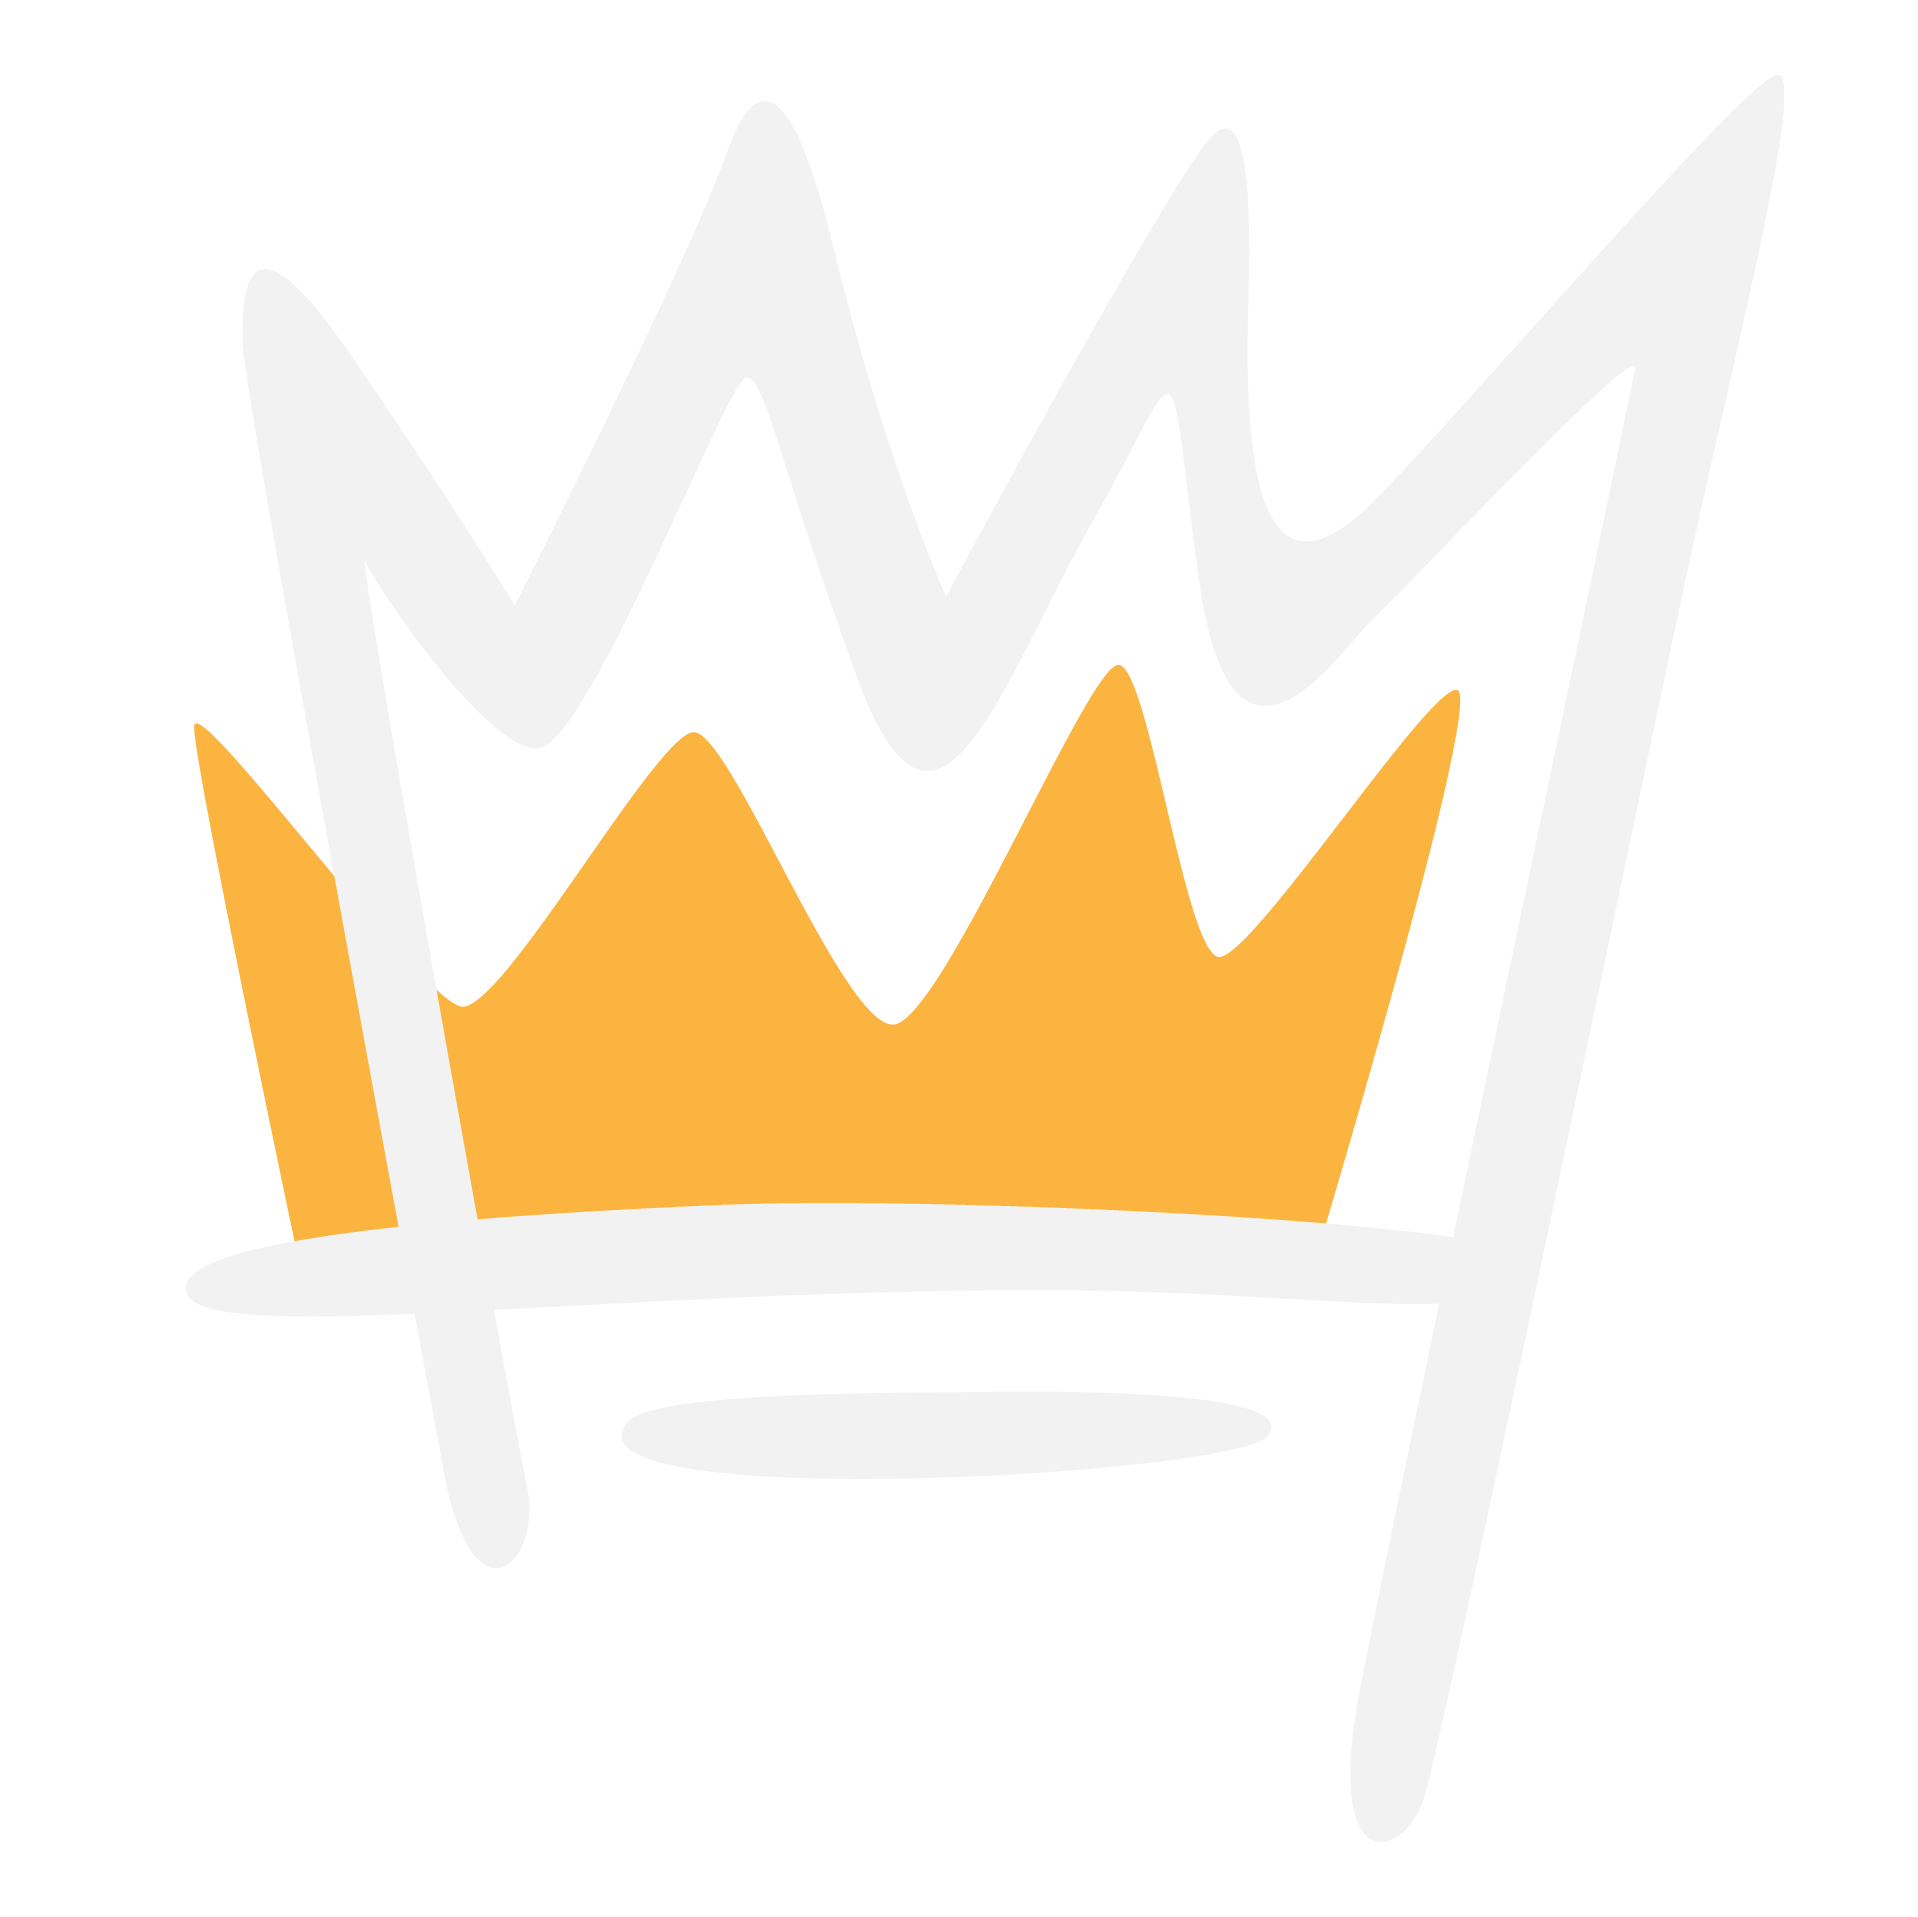 https://crownofficesupplies.com/wp-content/uploads/2020/04/crown-white_crown-icon-copy.png